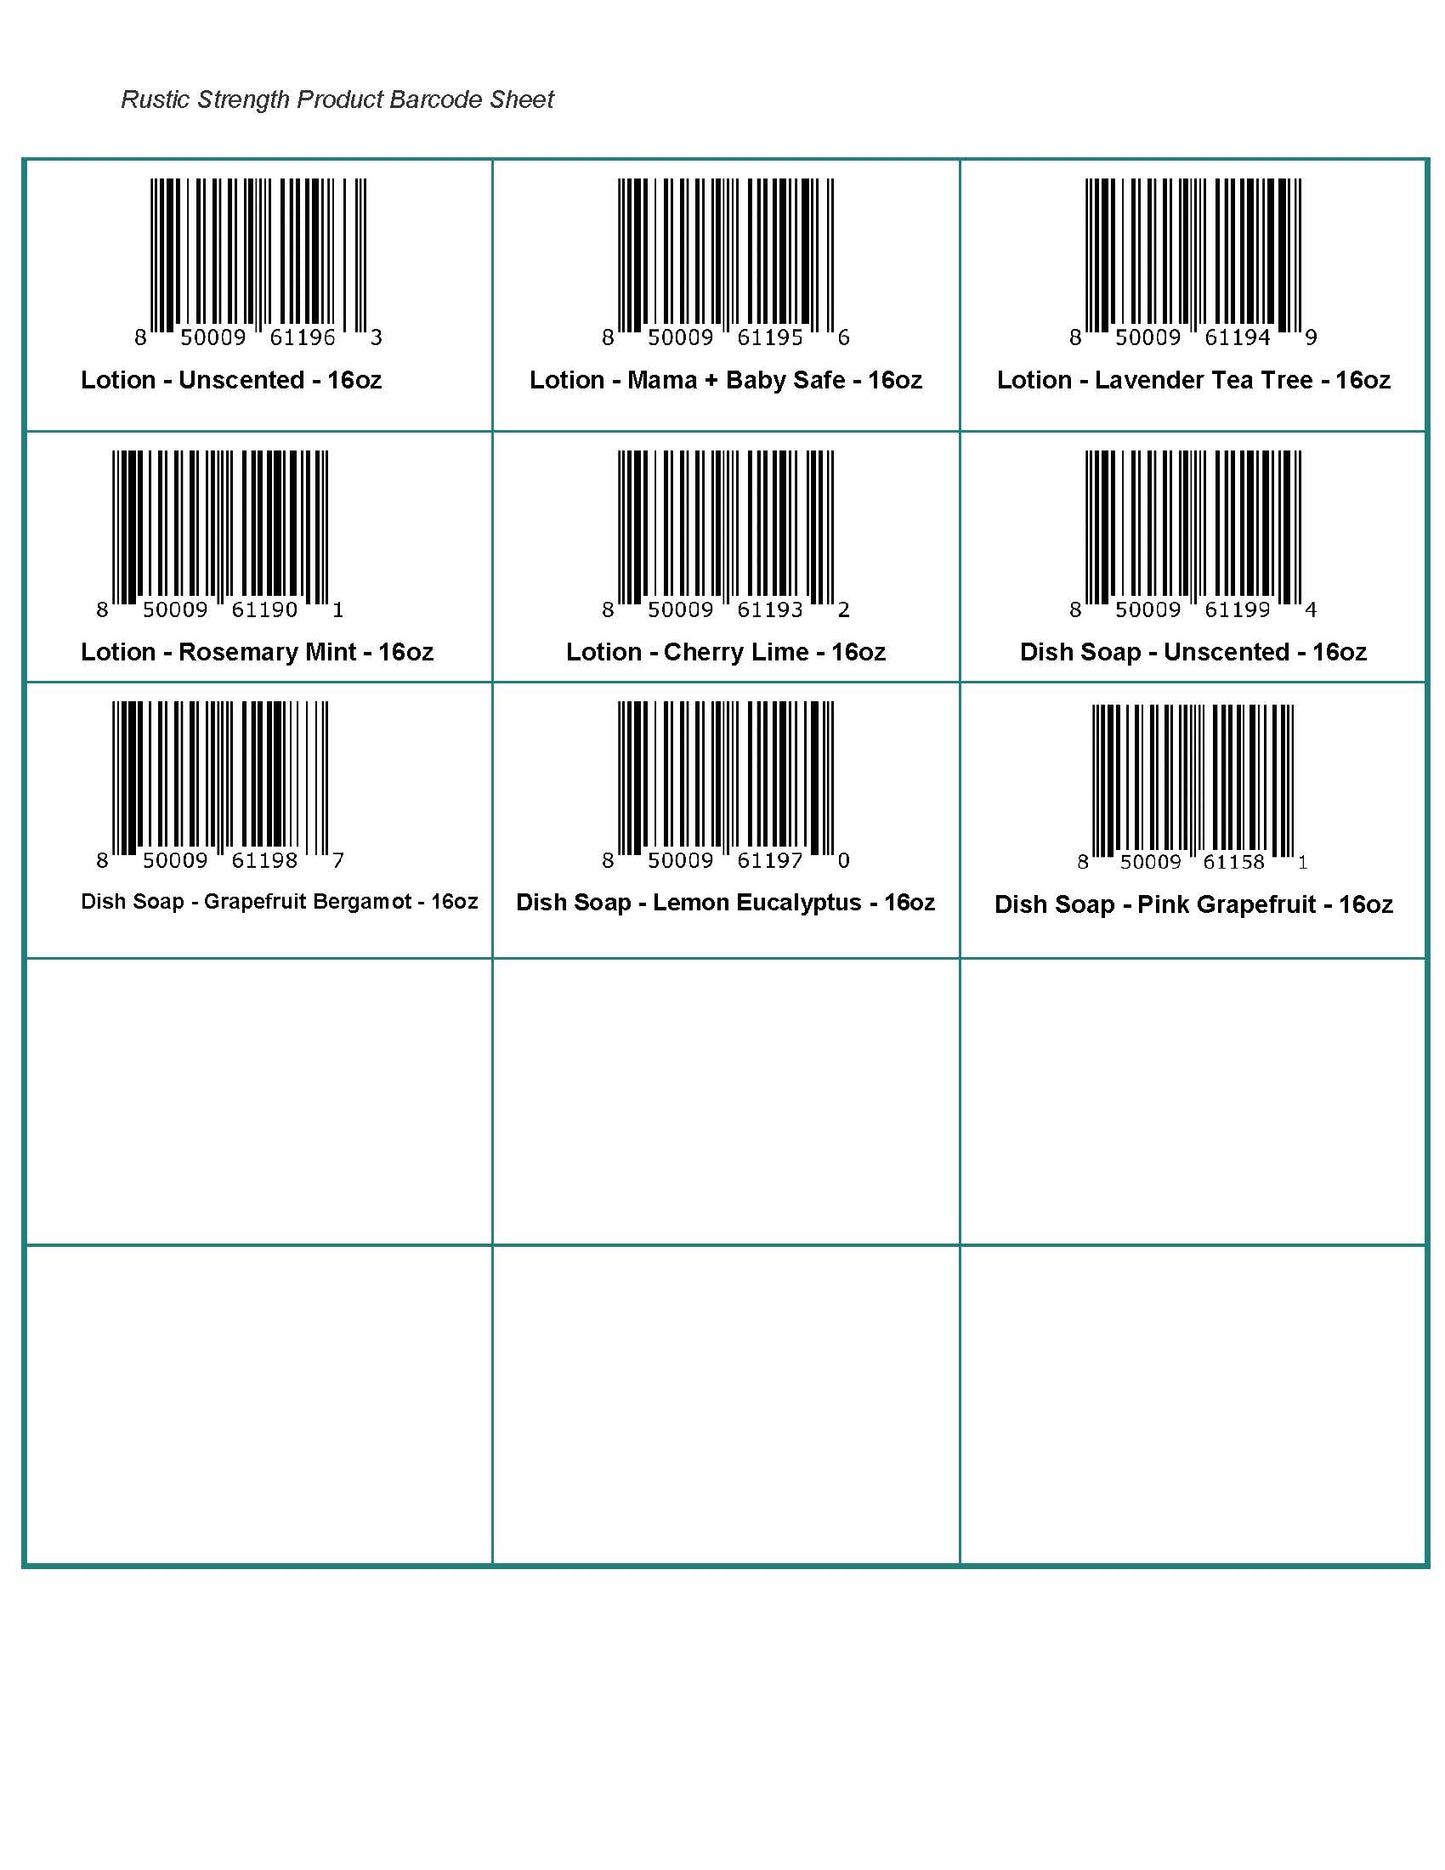 Barcodes for Retail Ready Items